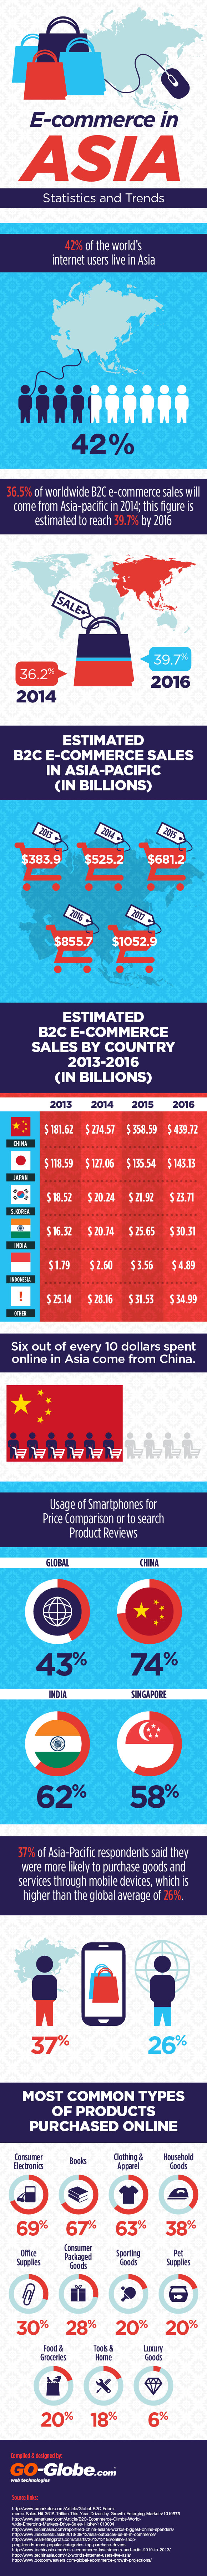 Key ecommerce trends in Asia - Infographic